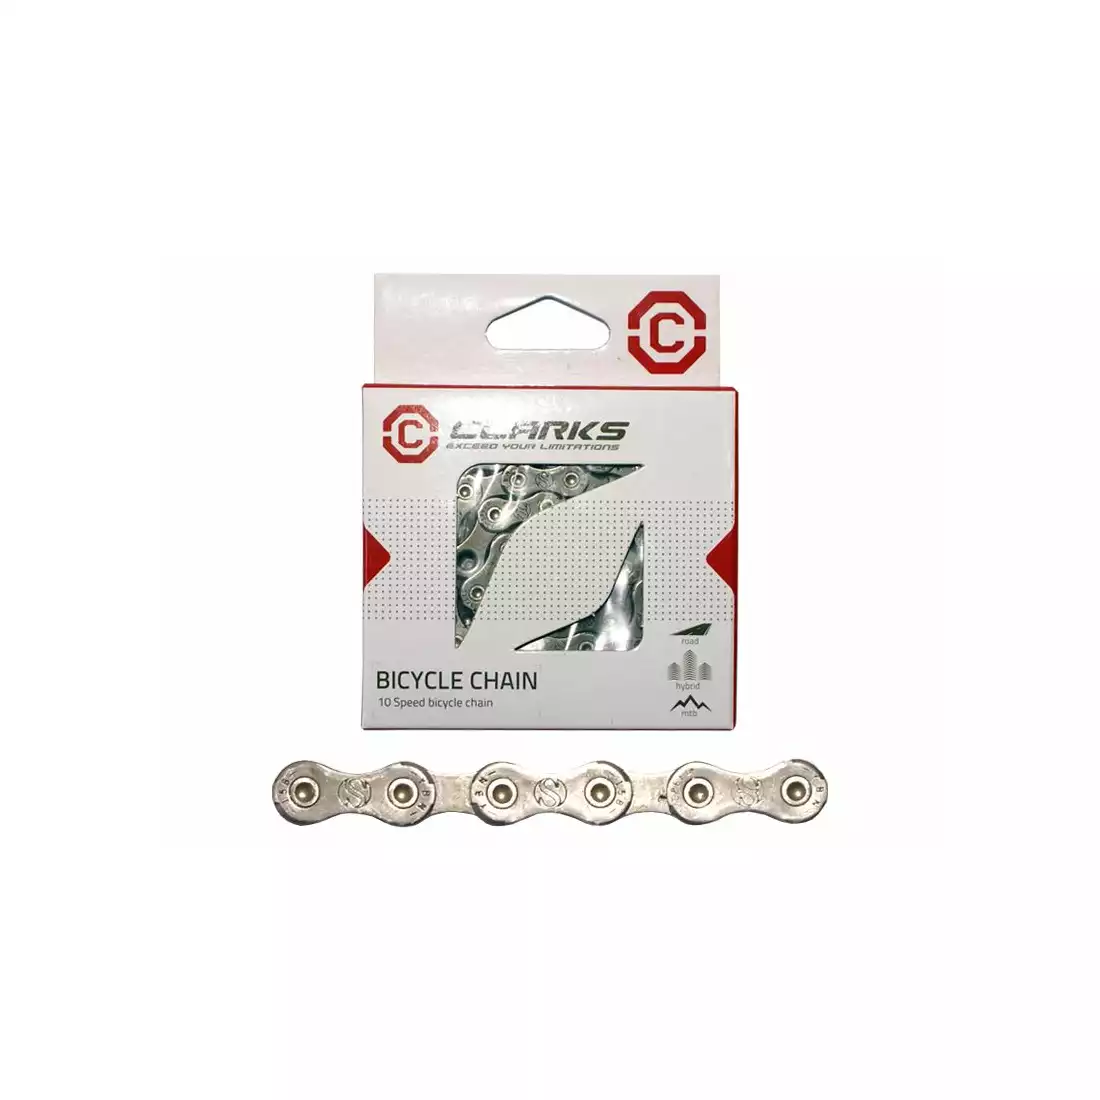 CLARKS C10 Bicycle chain 10-speed, 116 links, silver